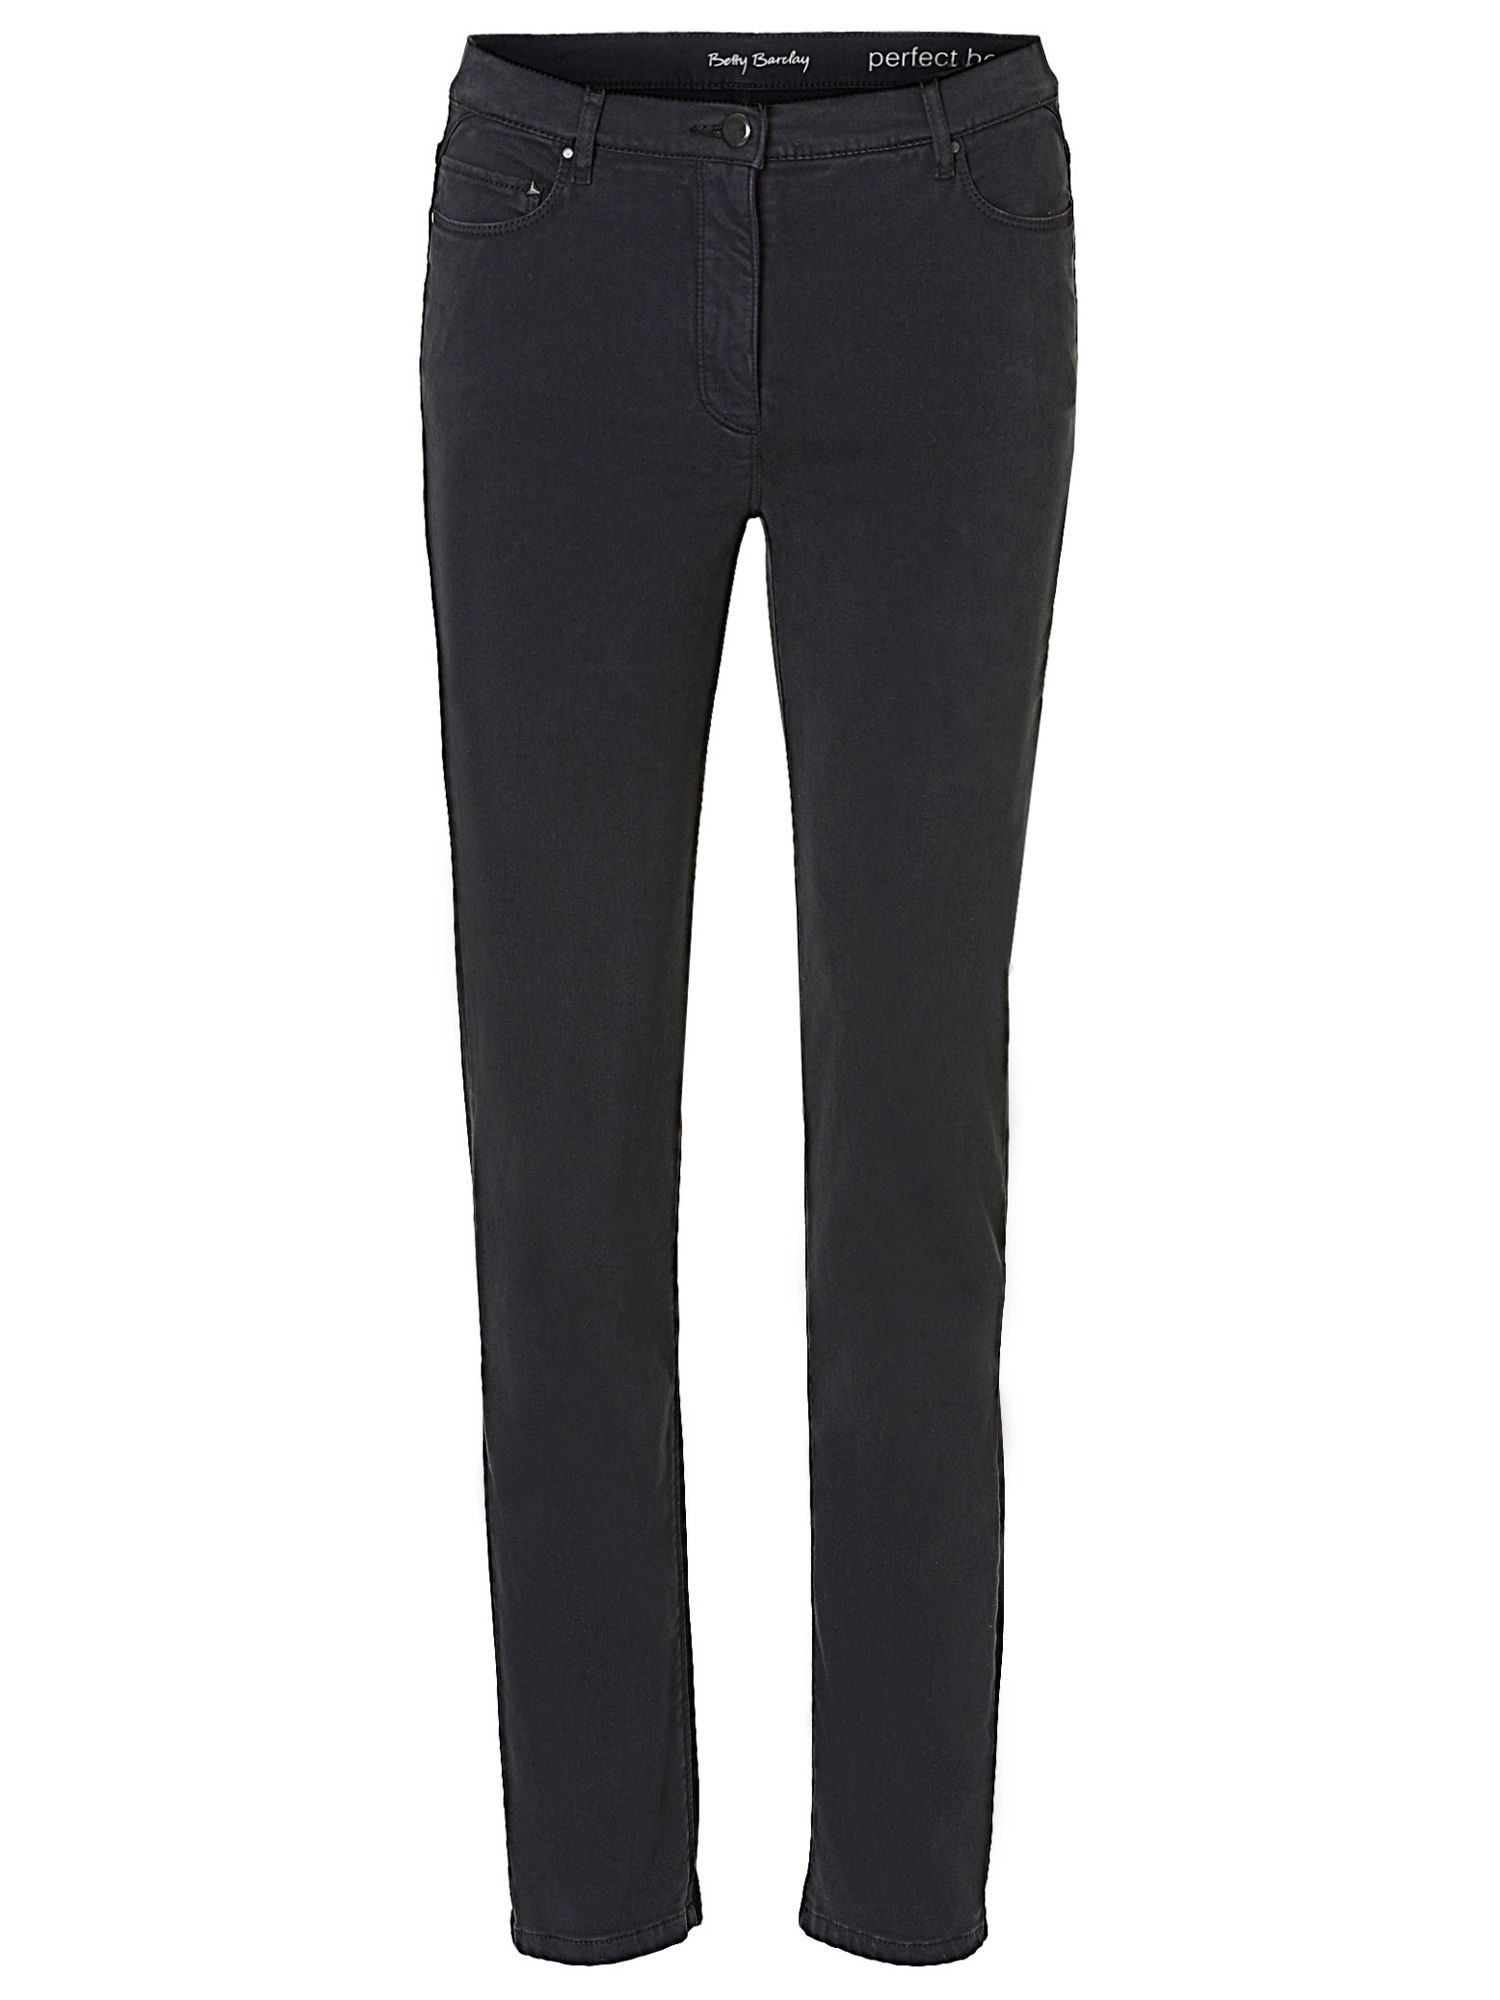 Betty Barclay Perfect Body Jeans, Black at John Lewis & Partners